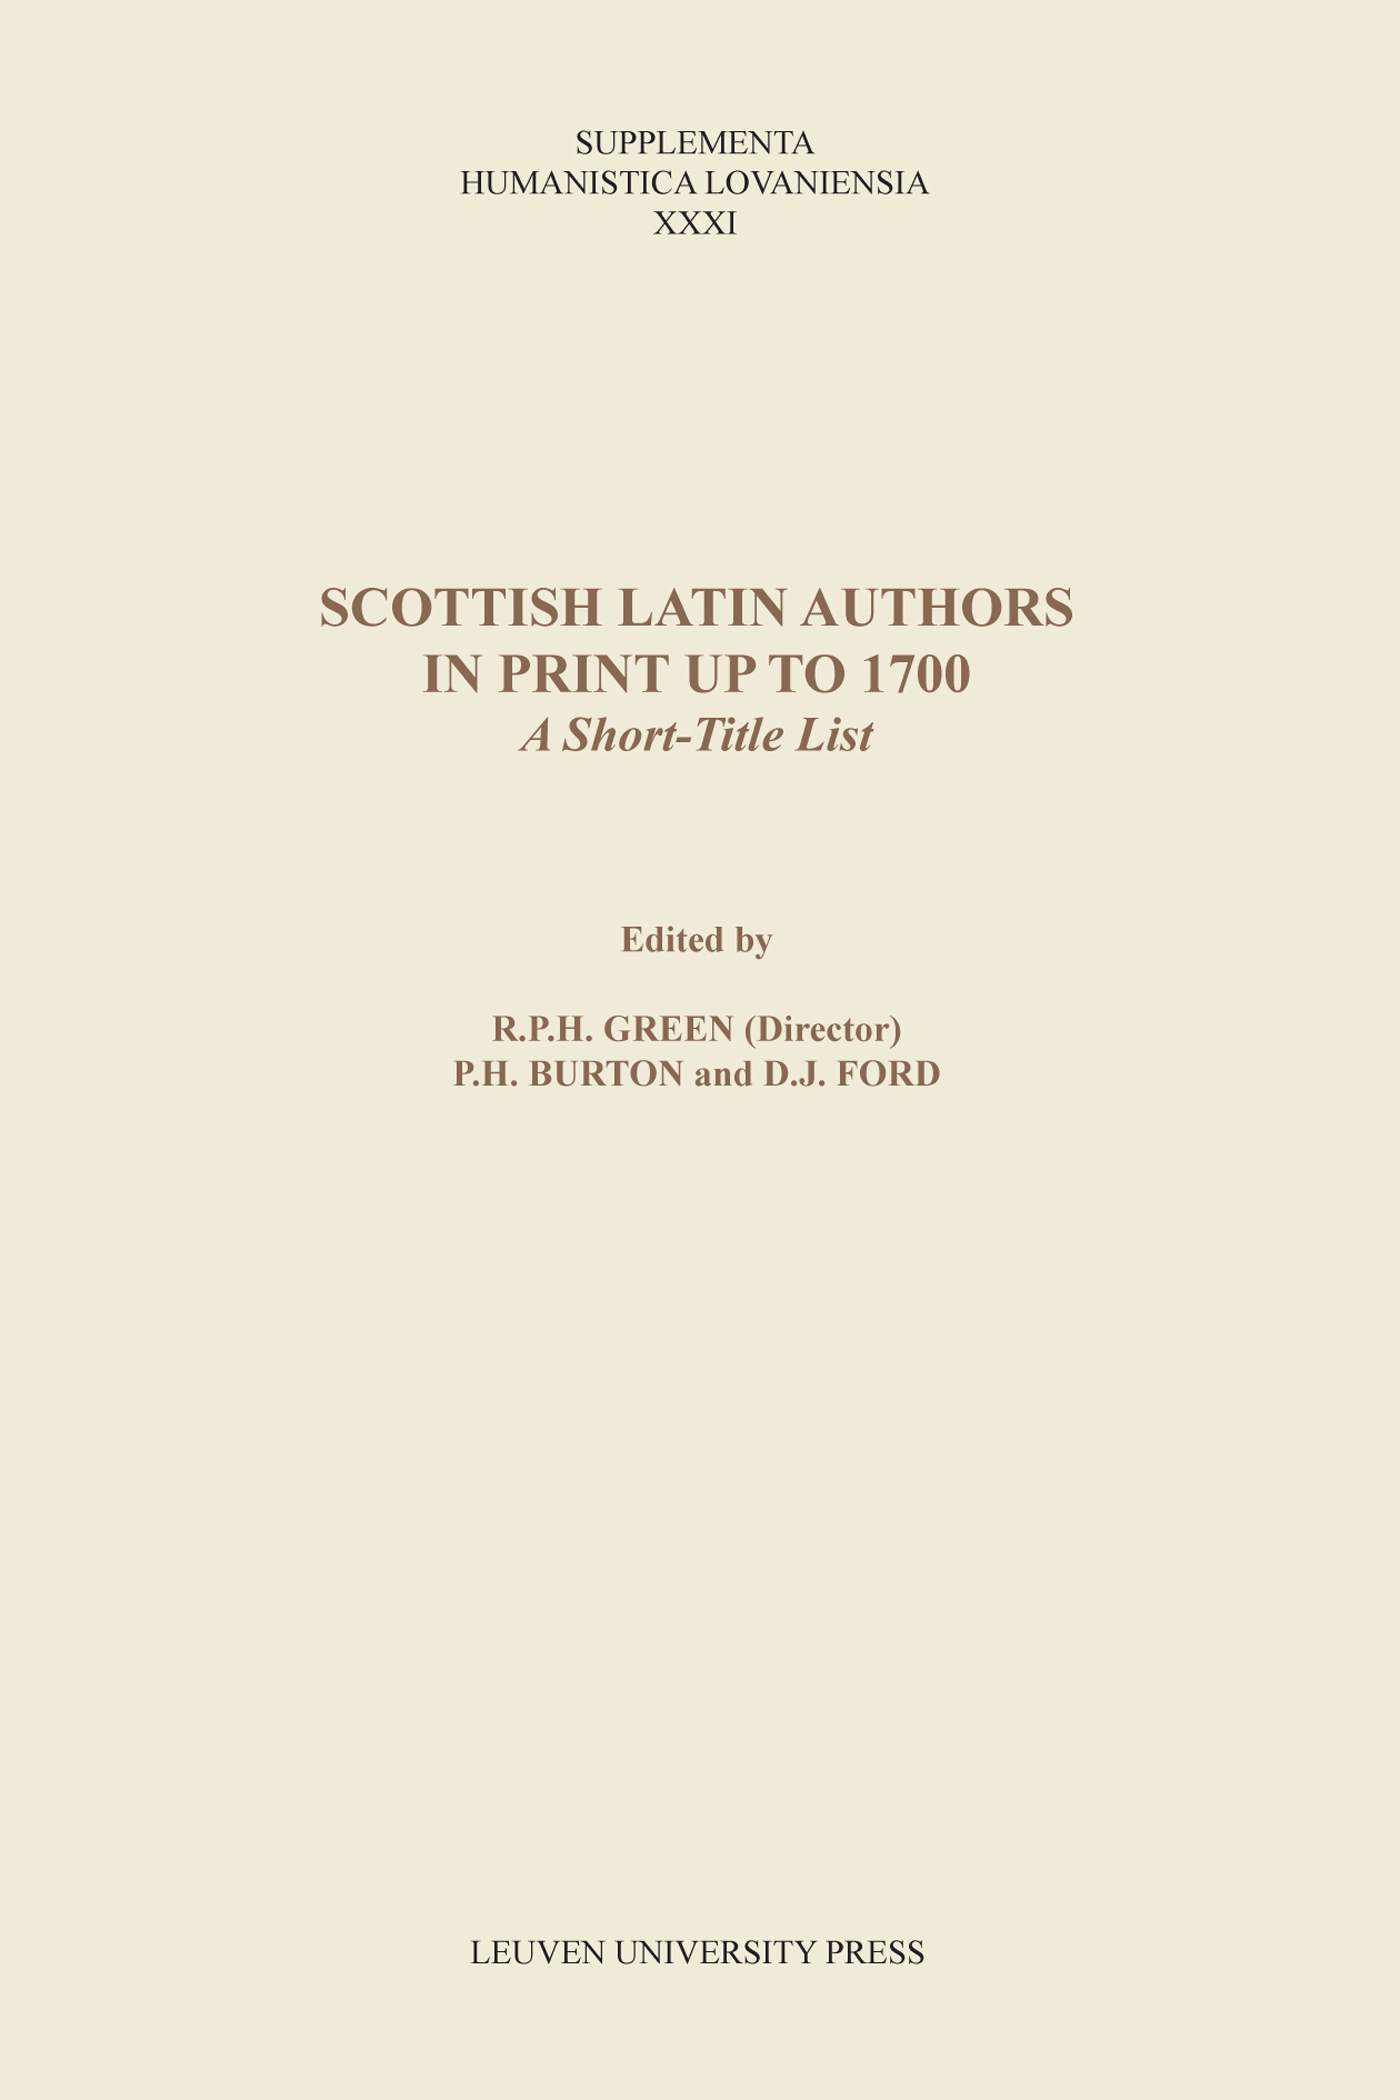 Scottish Latin authors in print up to 1700 (Ebook)